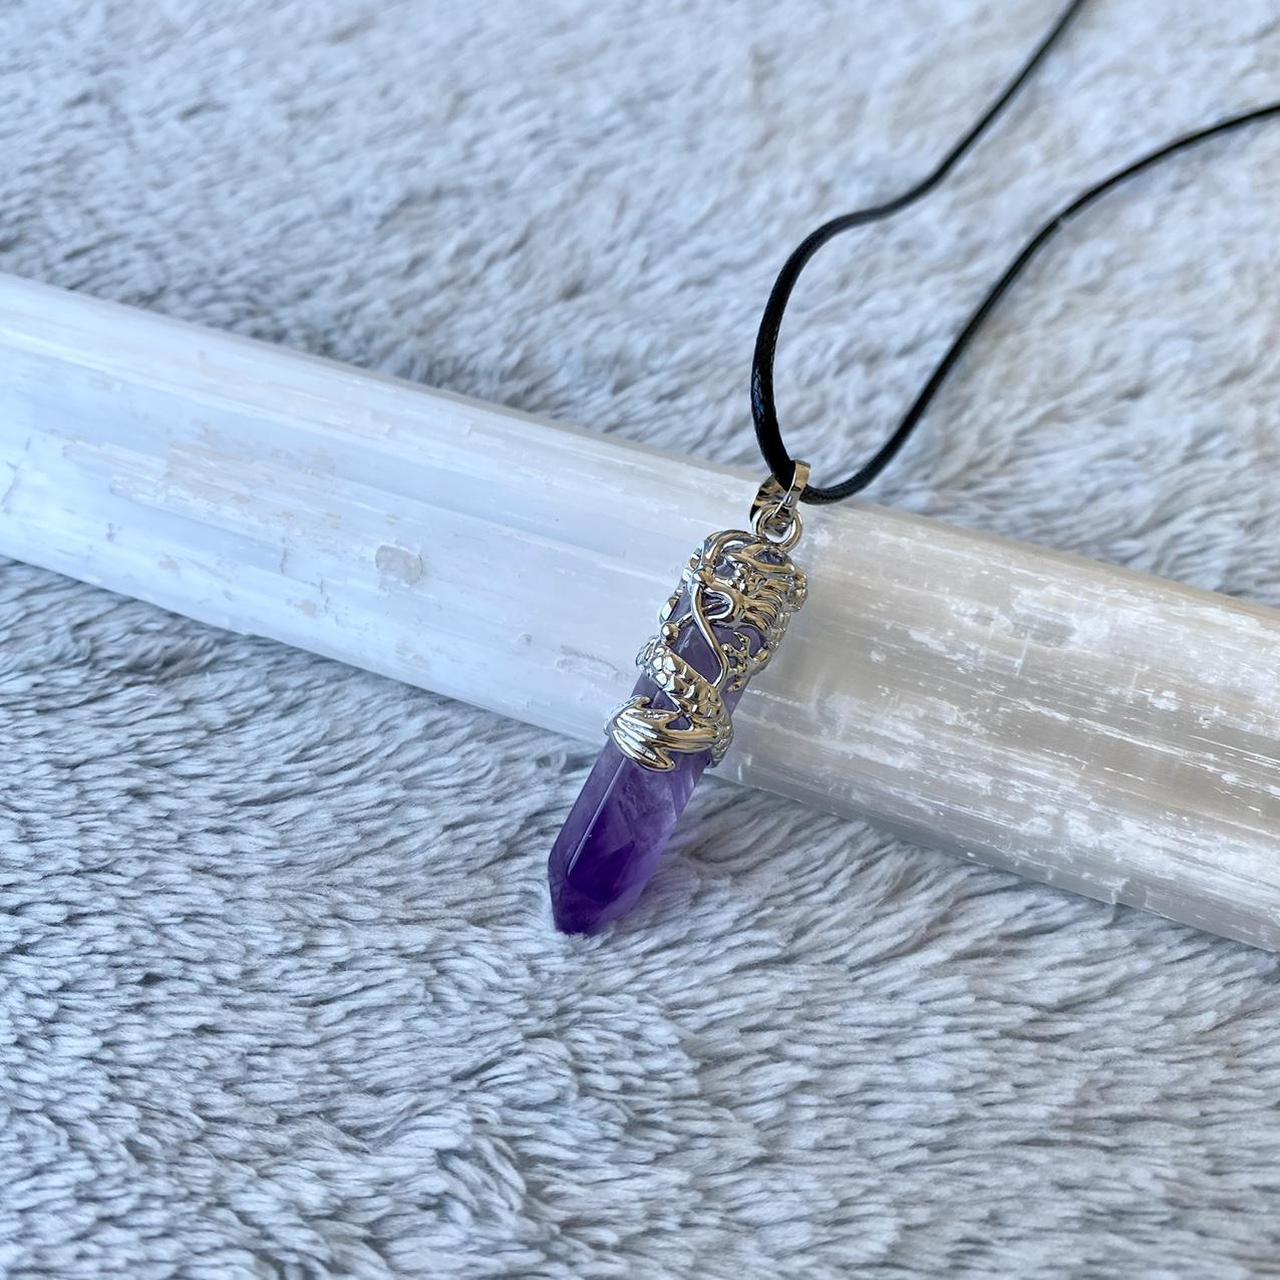 Amethyst Necklace with Carved Bone Medallion - Two Lucky Dragon Fish |  NOVICA